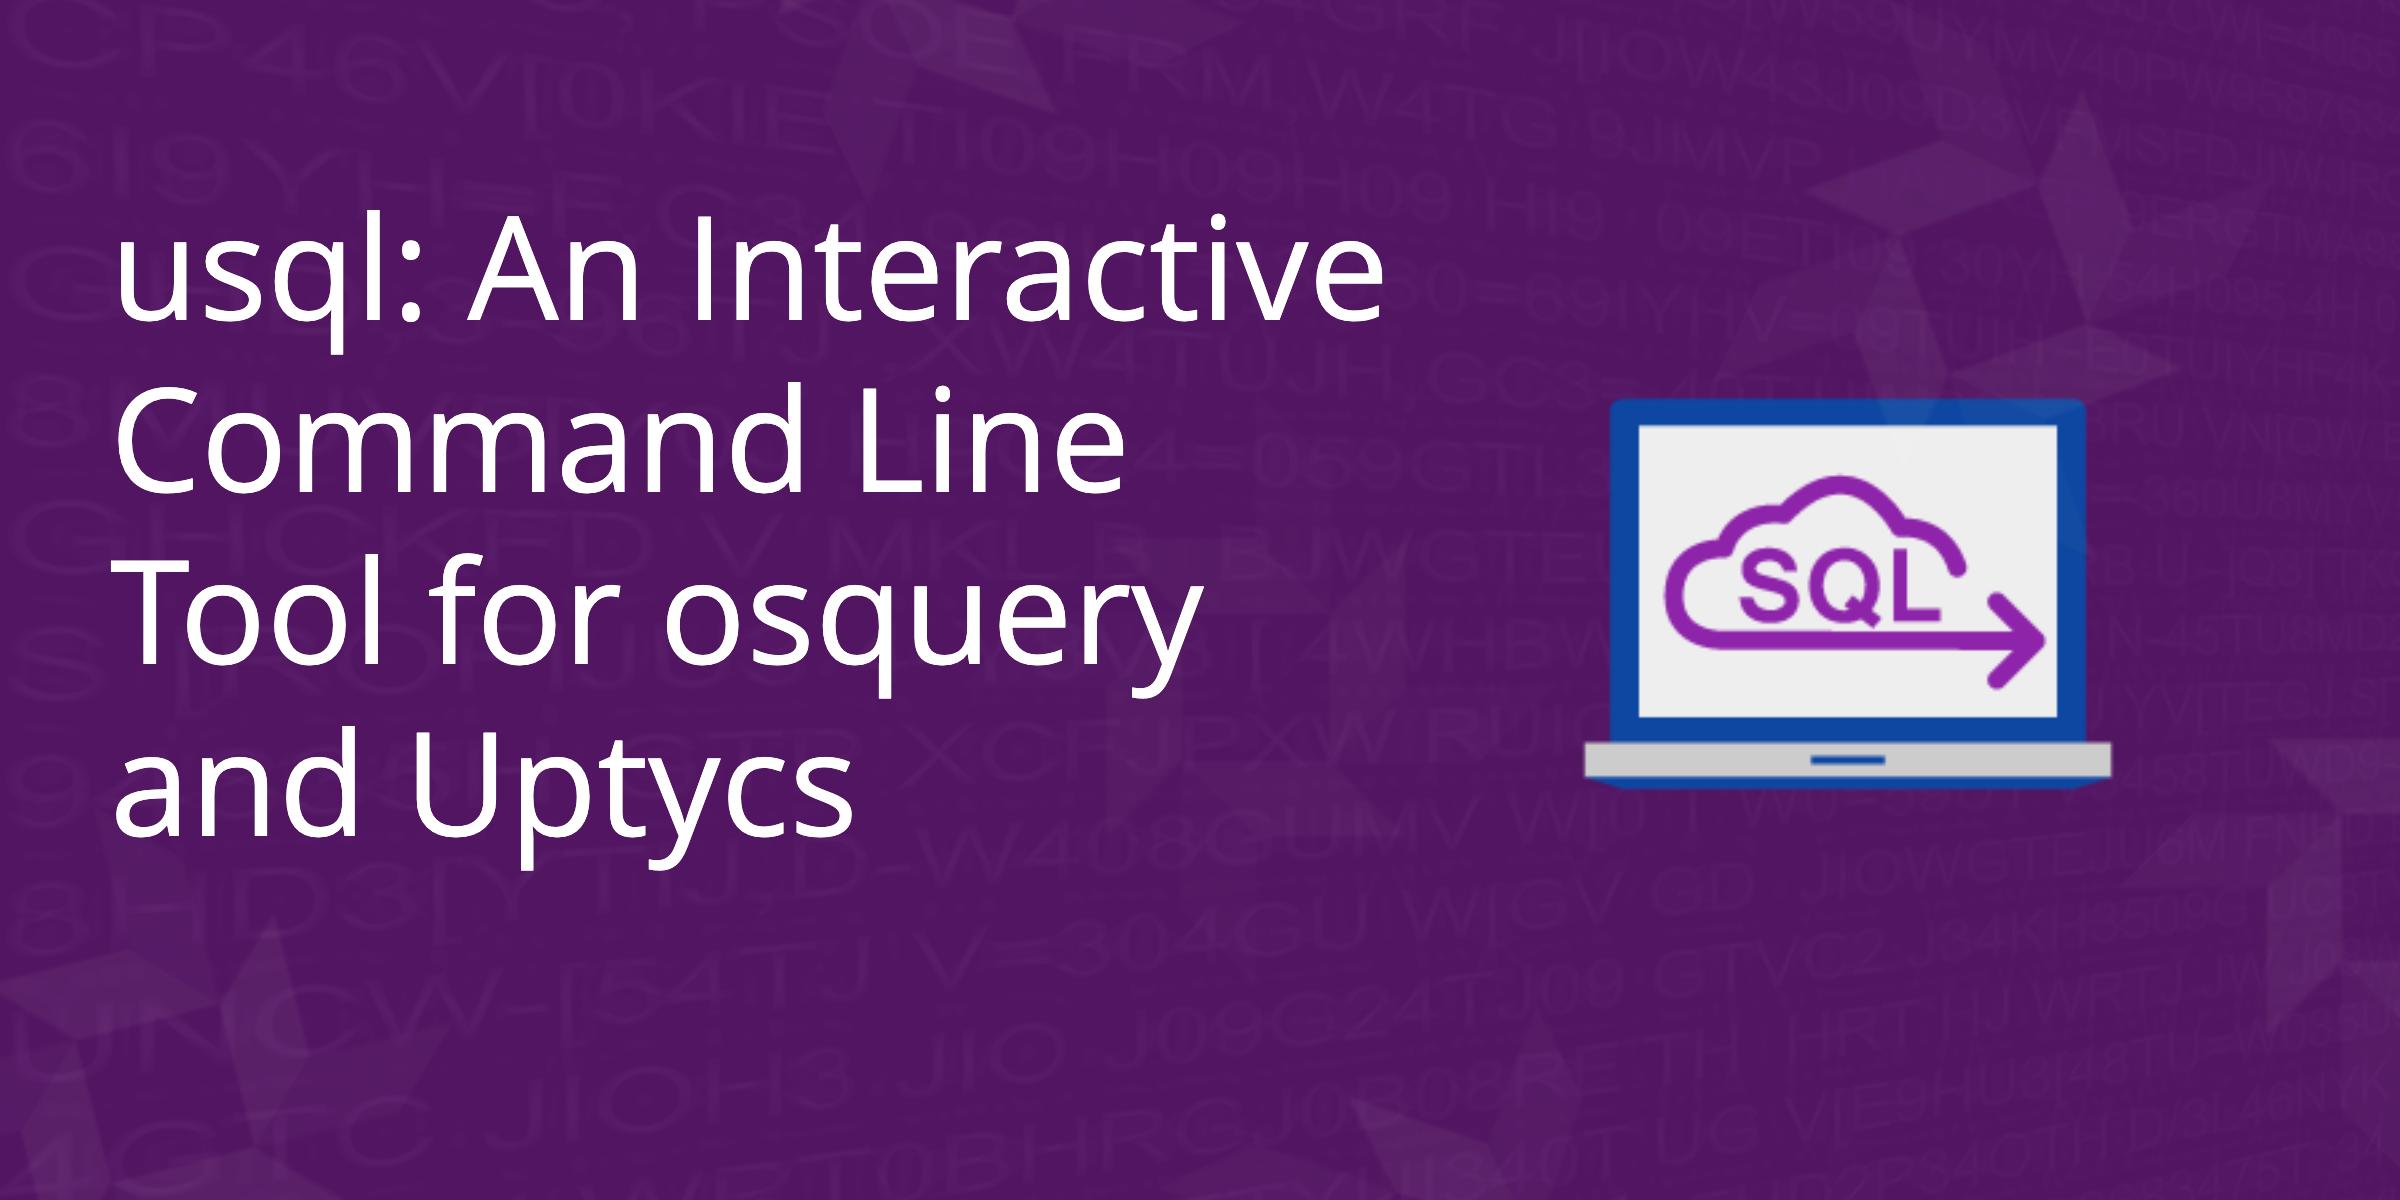 Introducing usql: an Interactive Command Line Tool for osquery & Uptycs Integration